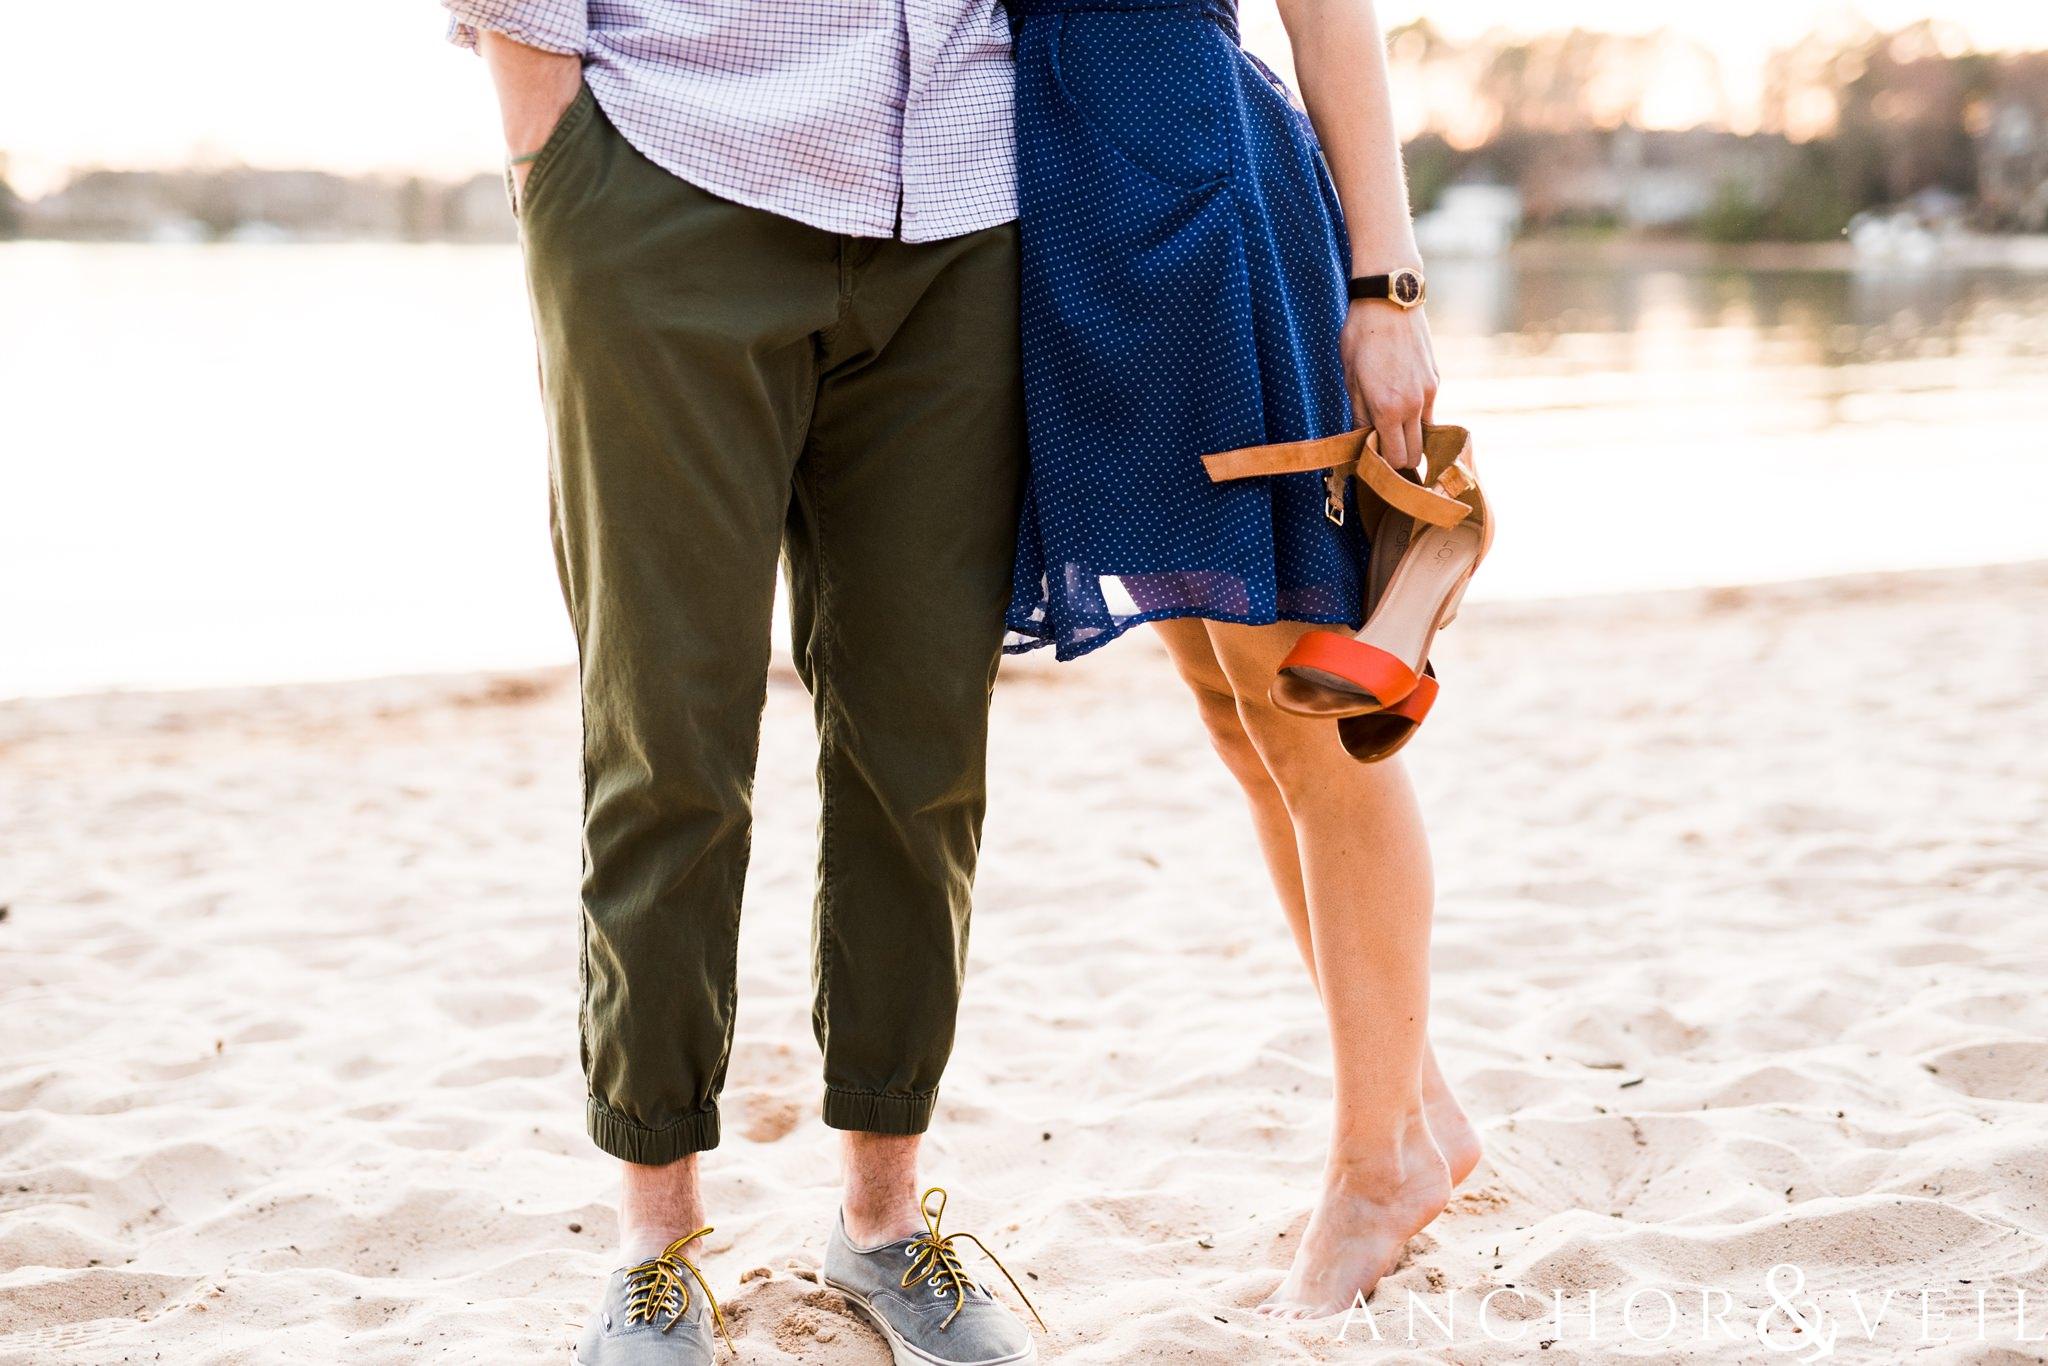 shoes ont eh beach during their southend Charlotte and Jetton park engagement session